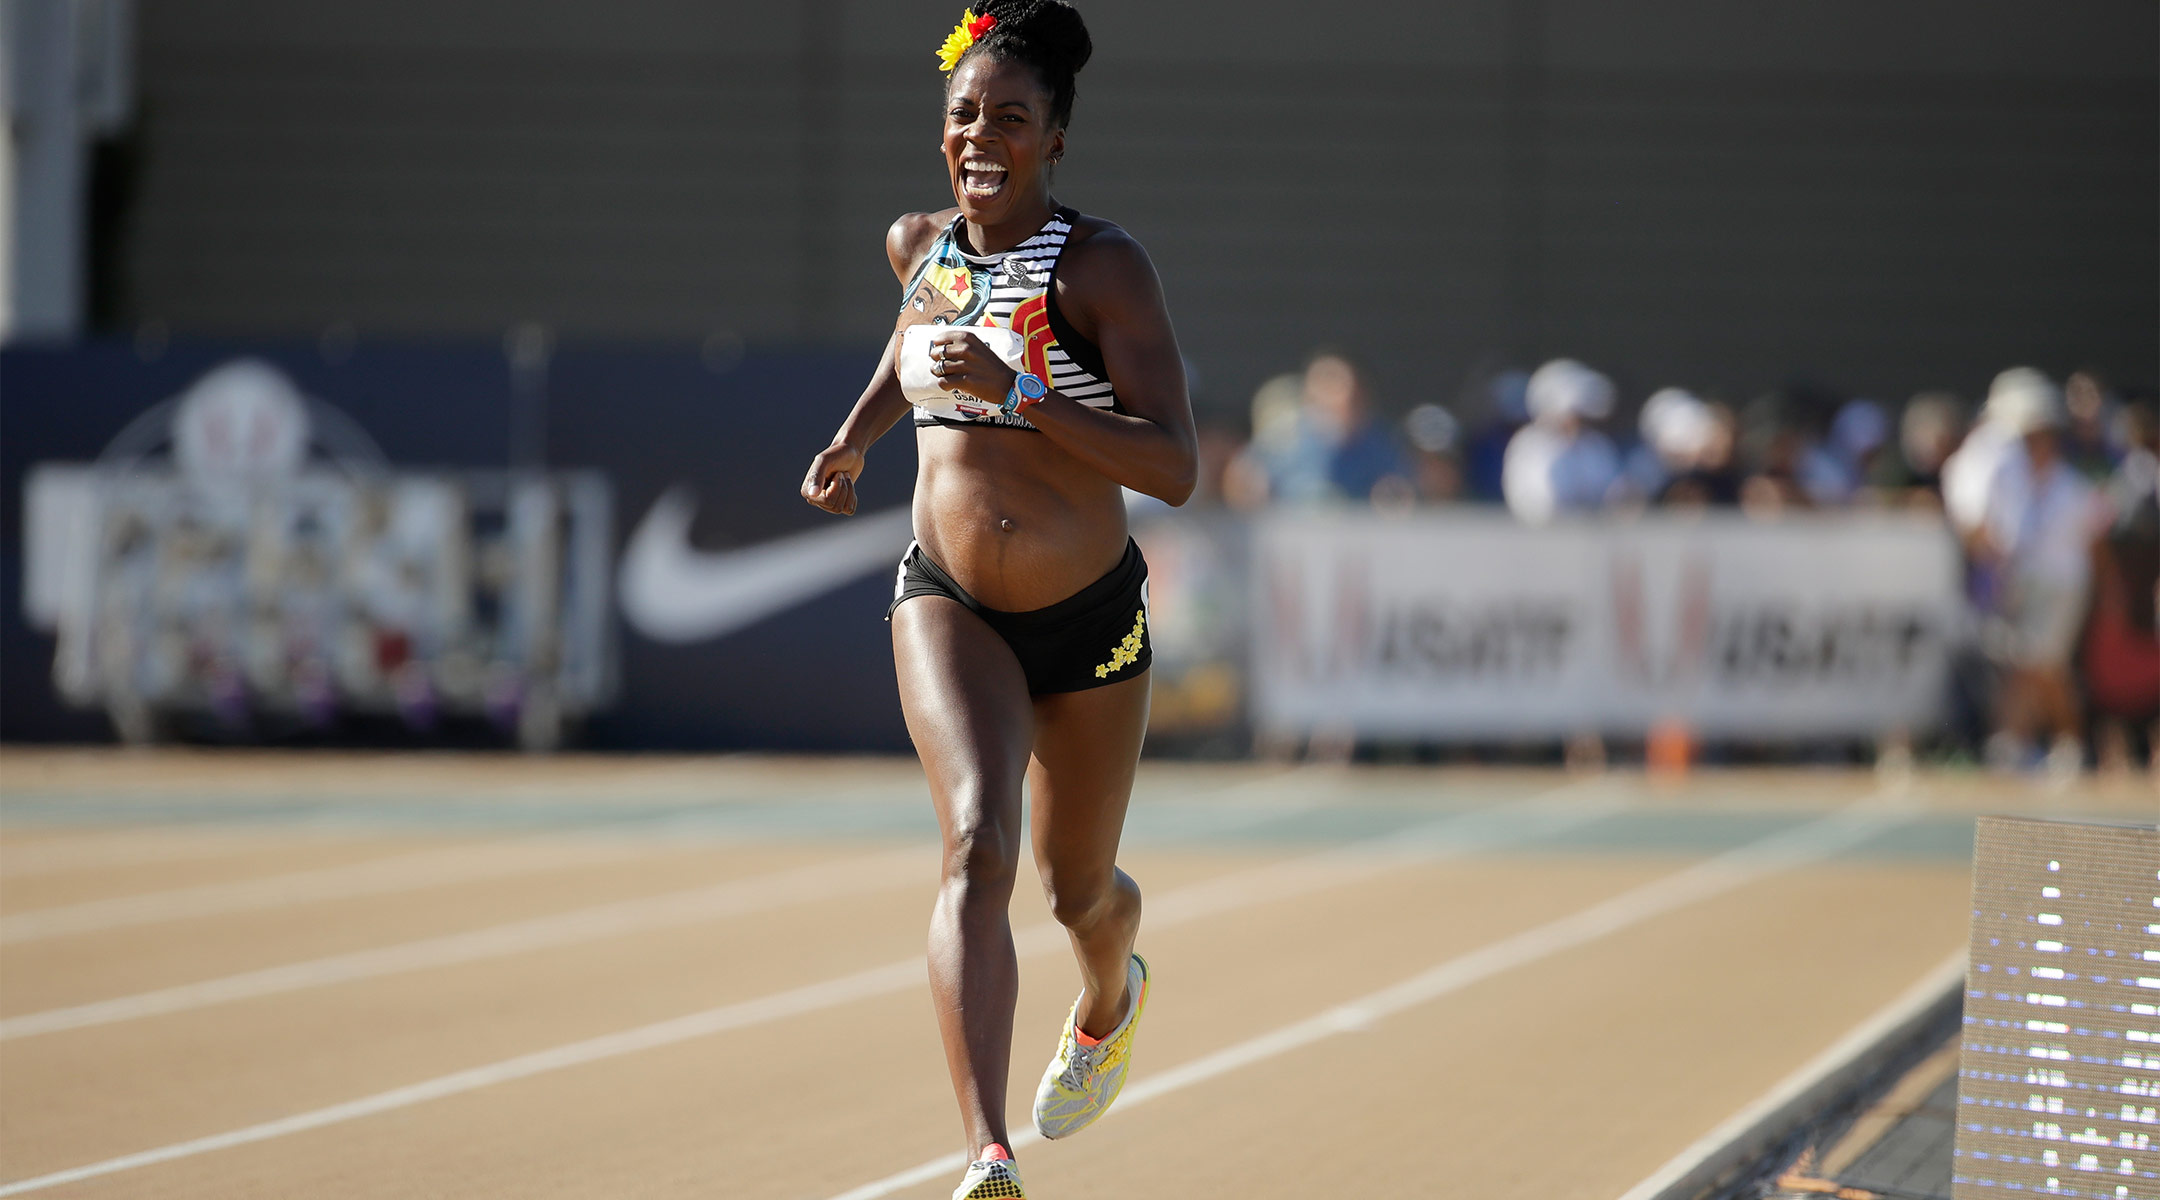 alysia montano track runner, racing while she's pregnant